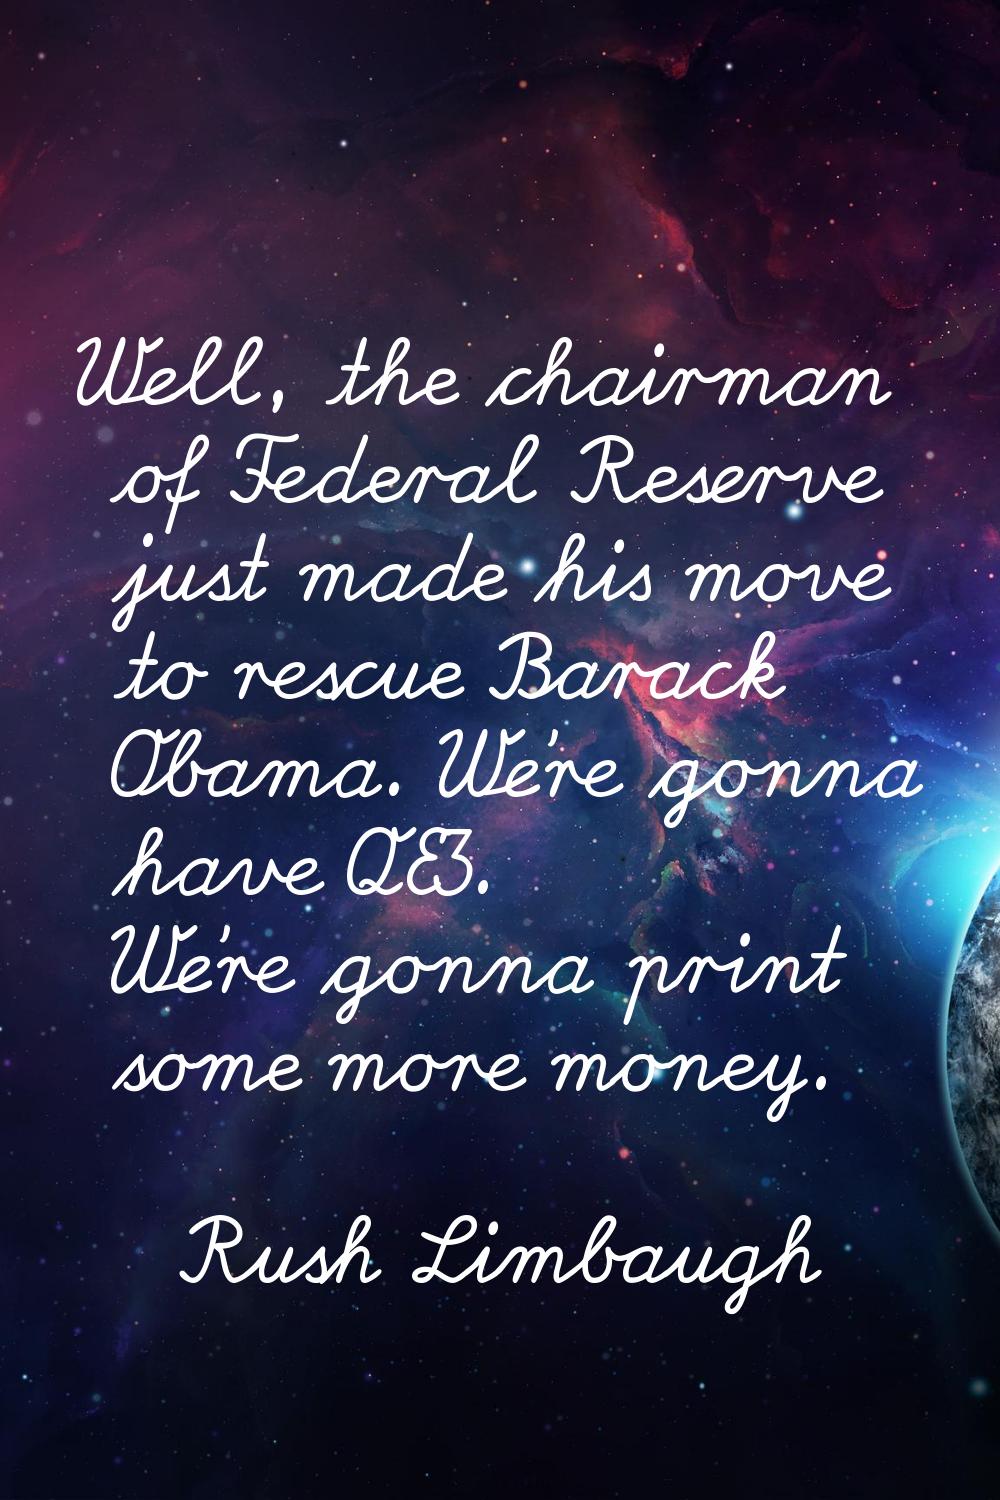 Well, the chairman of Federal Reserve just made his move to rescue Barack Obama. We're gonna have Q